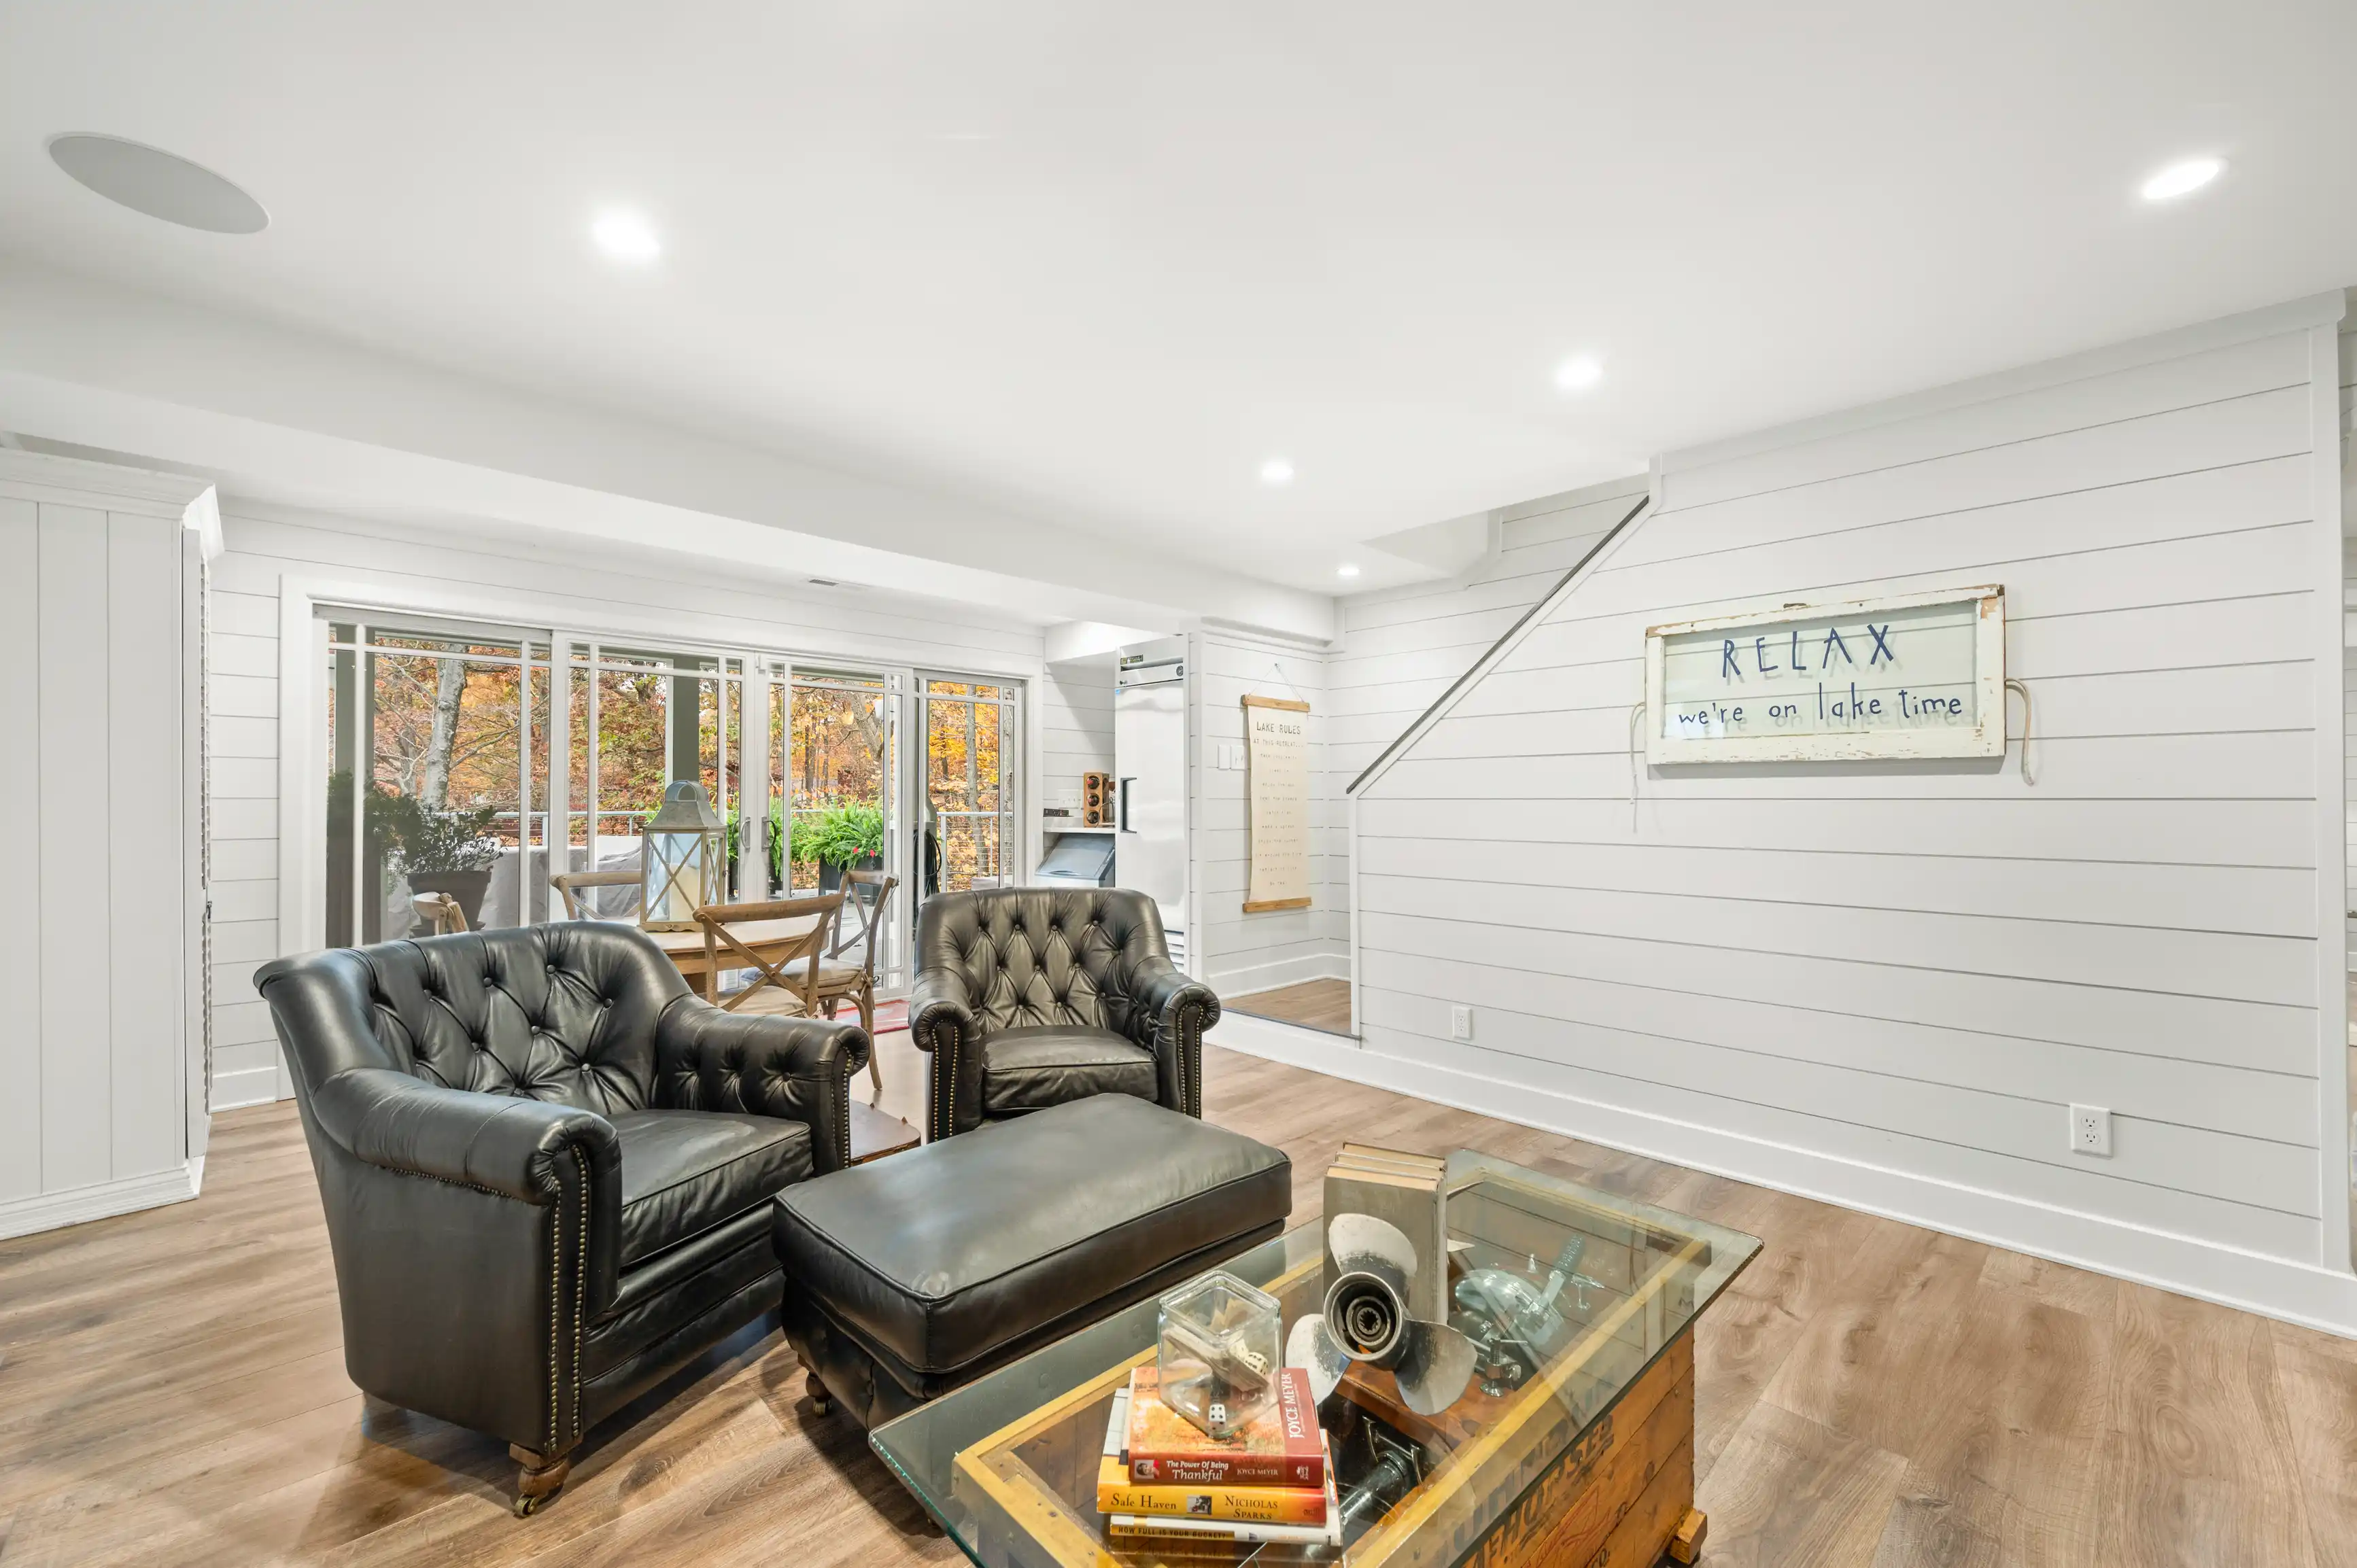 Bright and modern living room with black leather armchairs, a clear coffee table with books, white shiplap walls with a 'RELAX we're on lake time' sign, and sliding glass doors leading to an outdoor deck with autumn foliage visible outside.